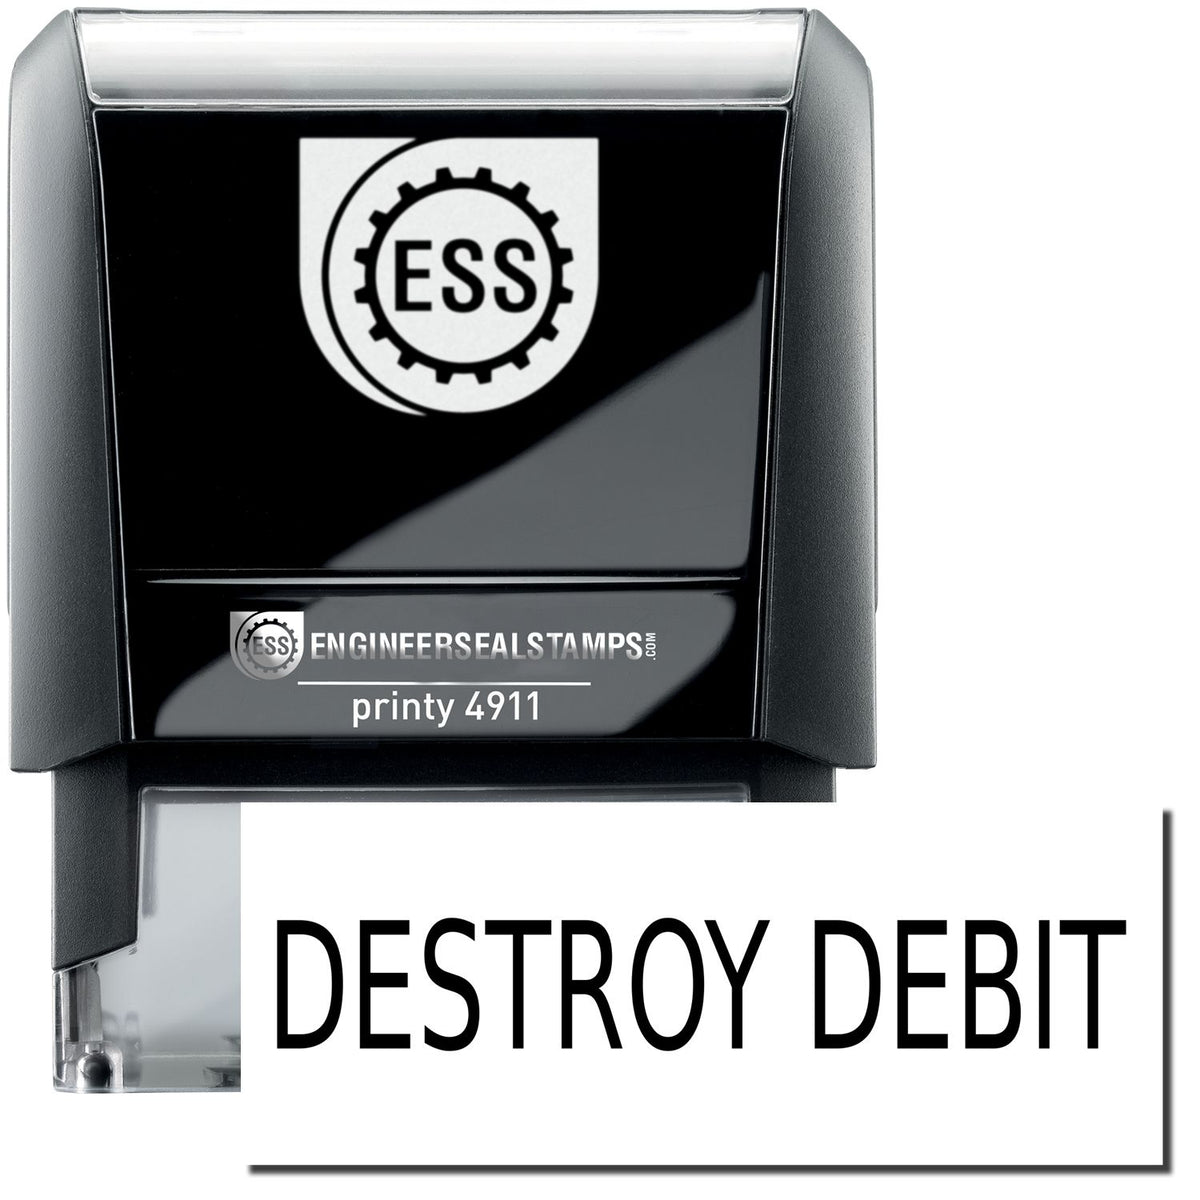 A self-inking stamp with a stamped image showing how the text &quot;DESTROY DEBIT&quot; is displayed after stamping.